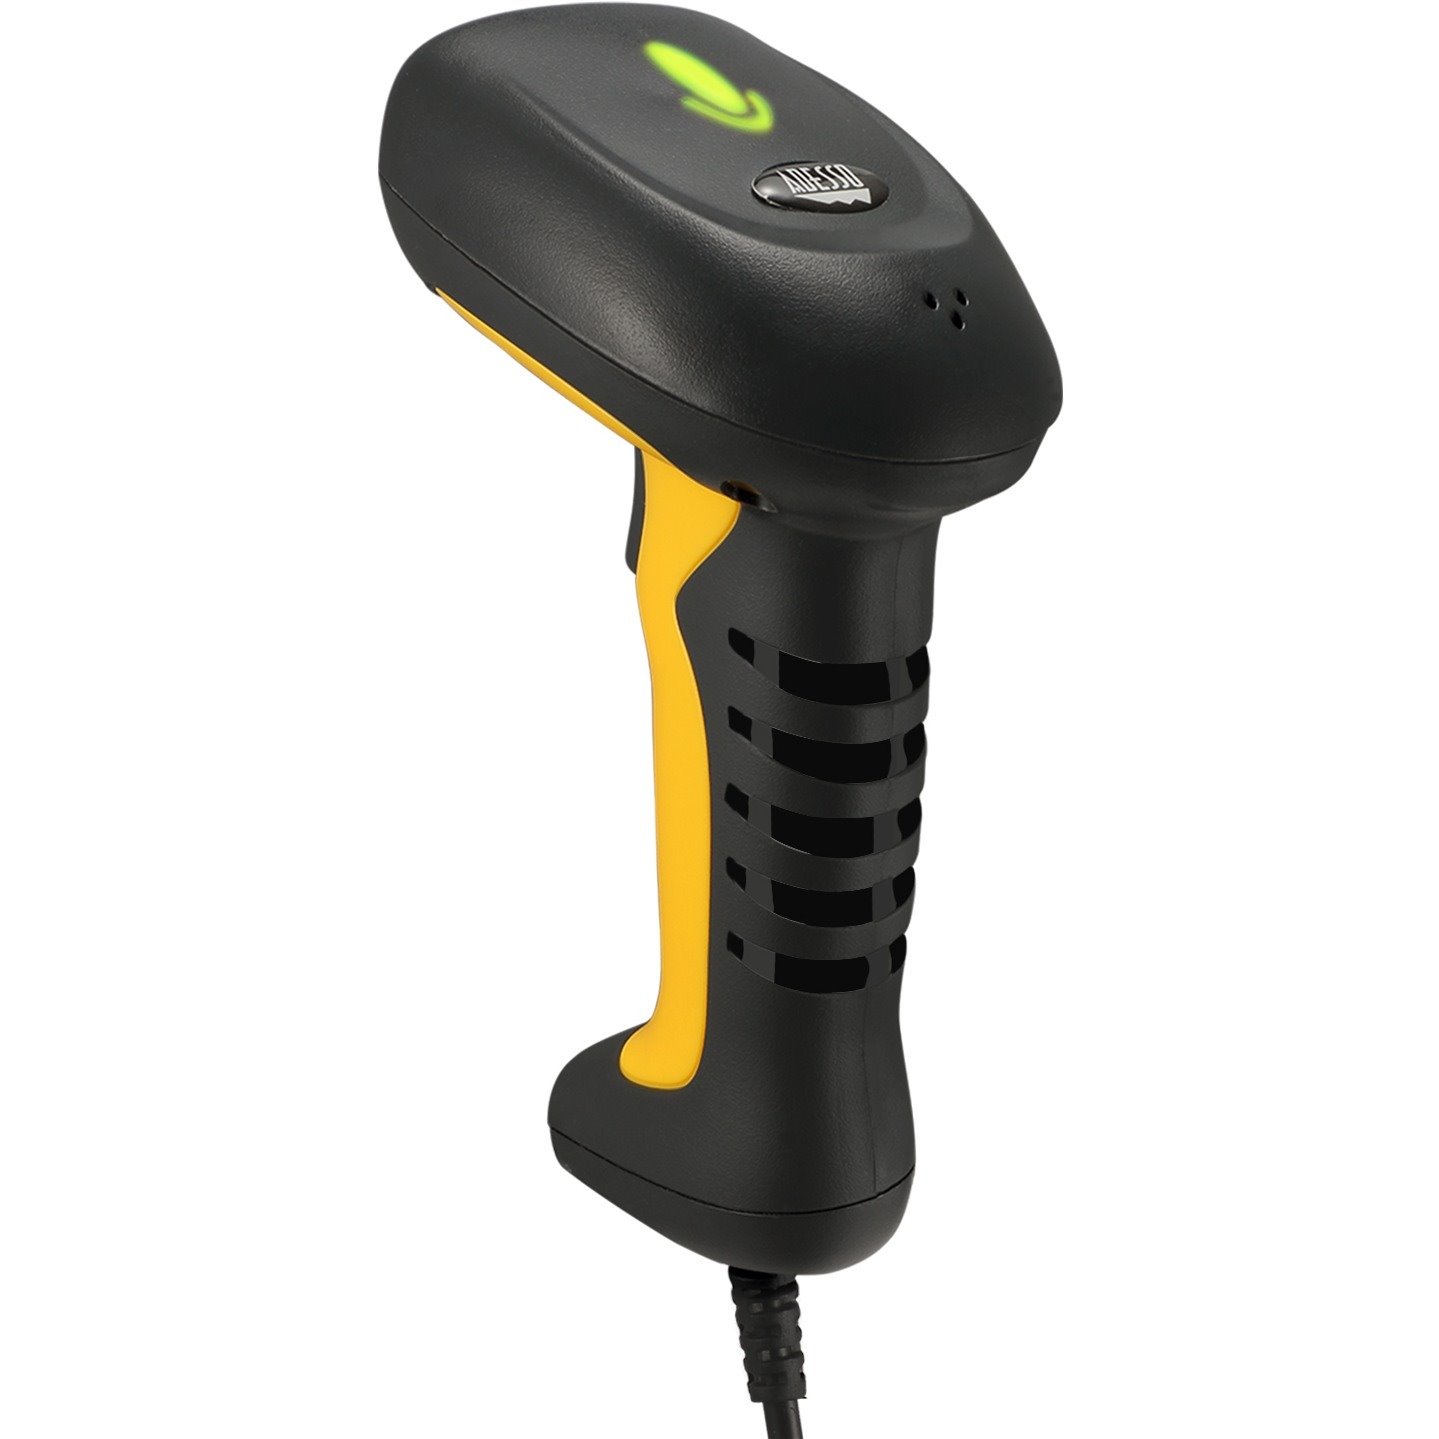 Adesso NuScan 5200TU Industrial, Healthcare, Logistics Handheld Barcode Scanner - Cable Connectivity - Yellow